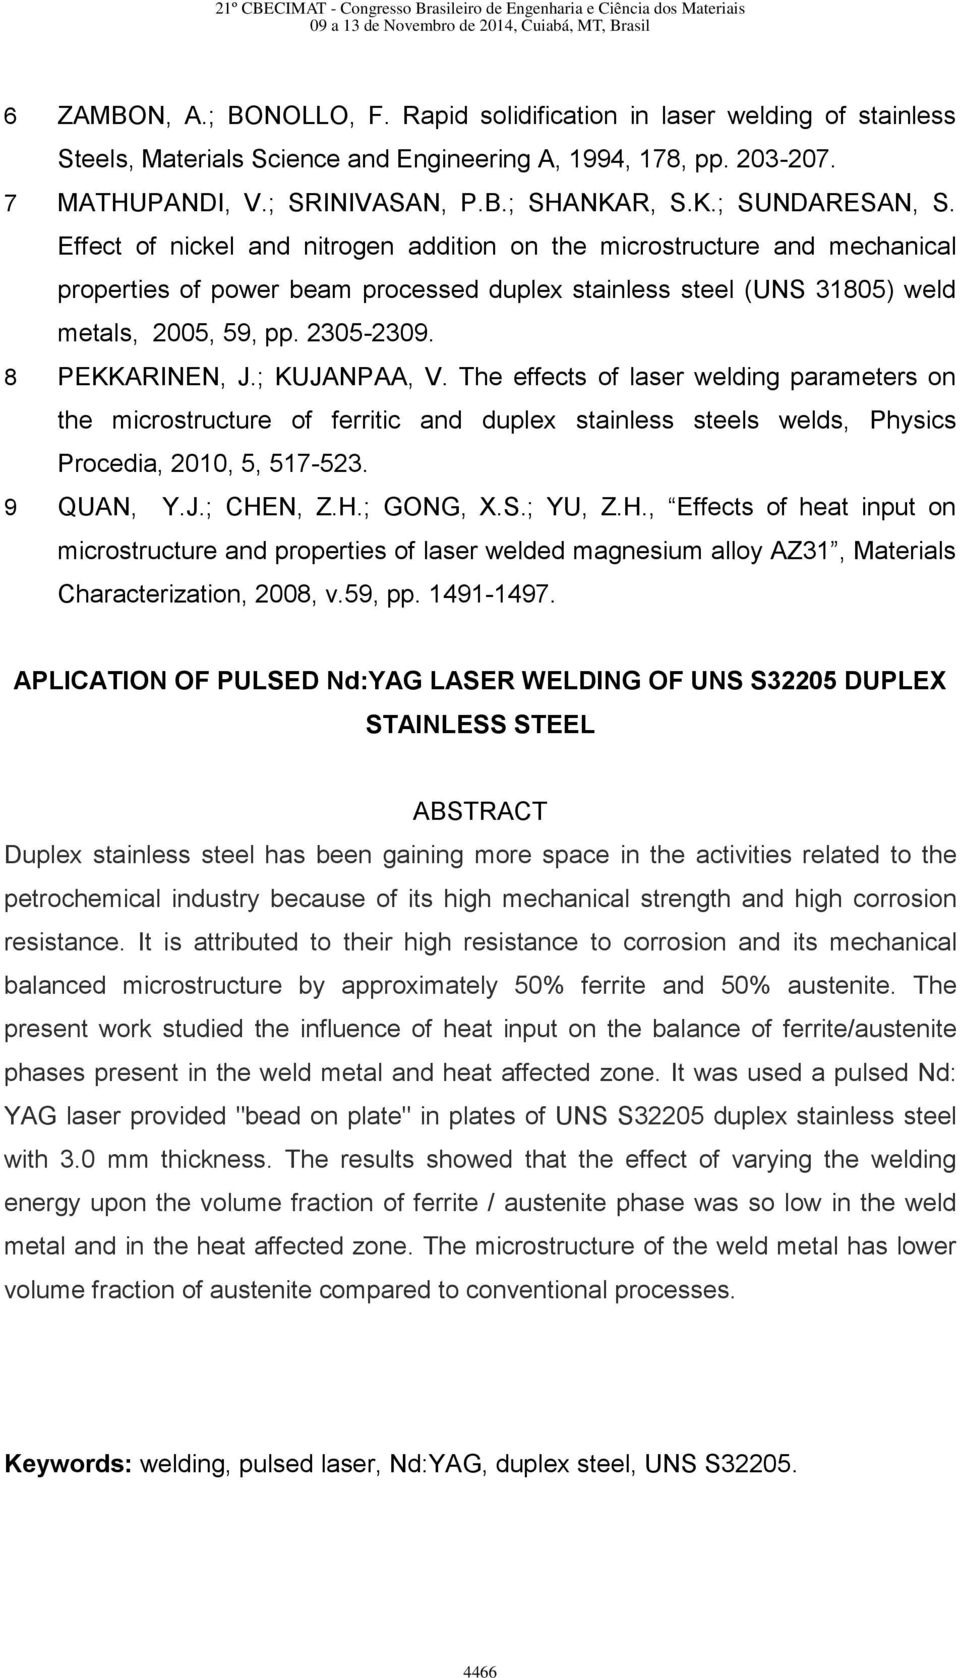 2305-2309. 8 PEKKARINEN, J.; KUJANPAA, V. The effects of laser welding parameters on the microstructure of ferritic and duplex stainless steels welds, Physics Procedia, 2010, 5, 517-523. 9 QUAN, Y.J.; CHEN, Z.